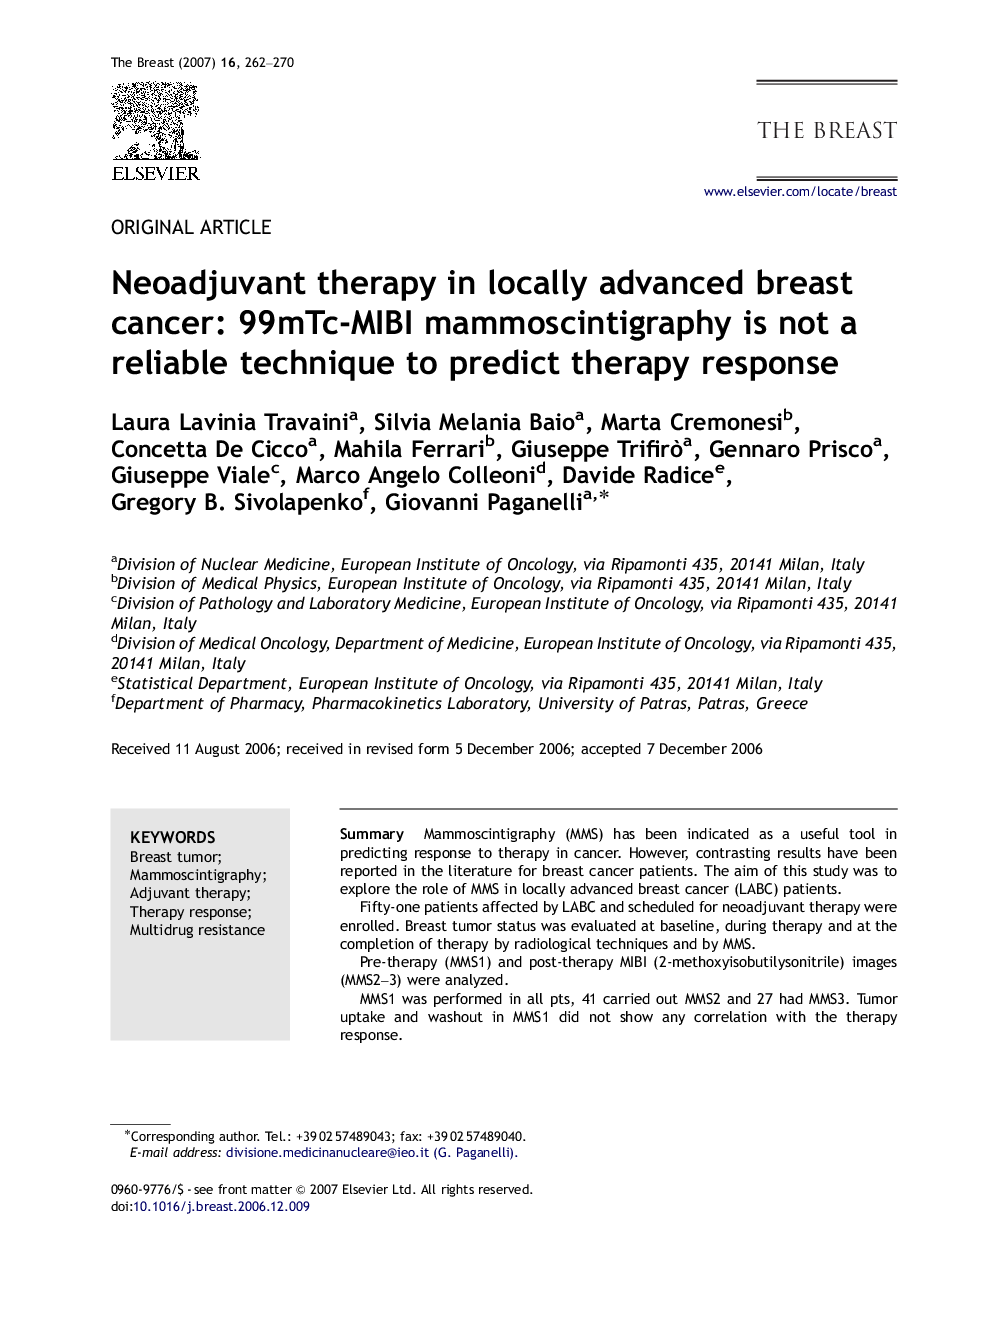 Neoadjuvant therapy in locally advanced breast cancer: 99mTc-MIBI mammoscintigraphy is not a reliable technique to predict therapy response